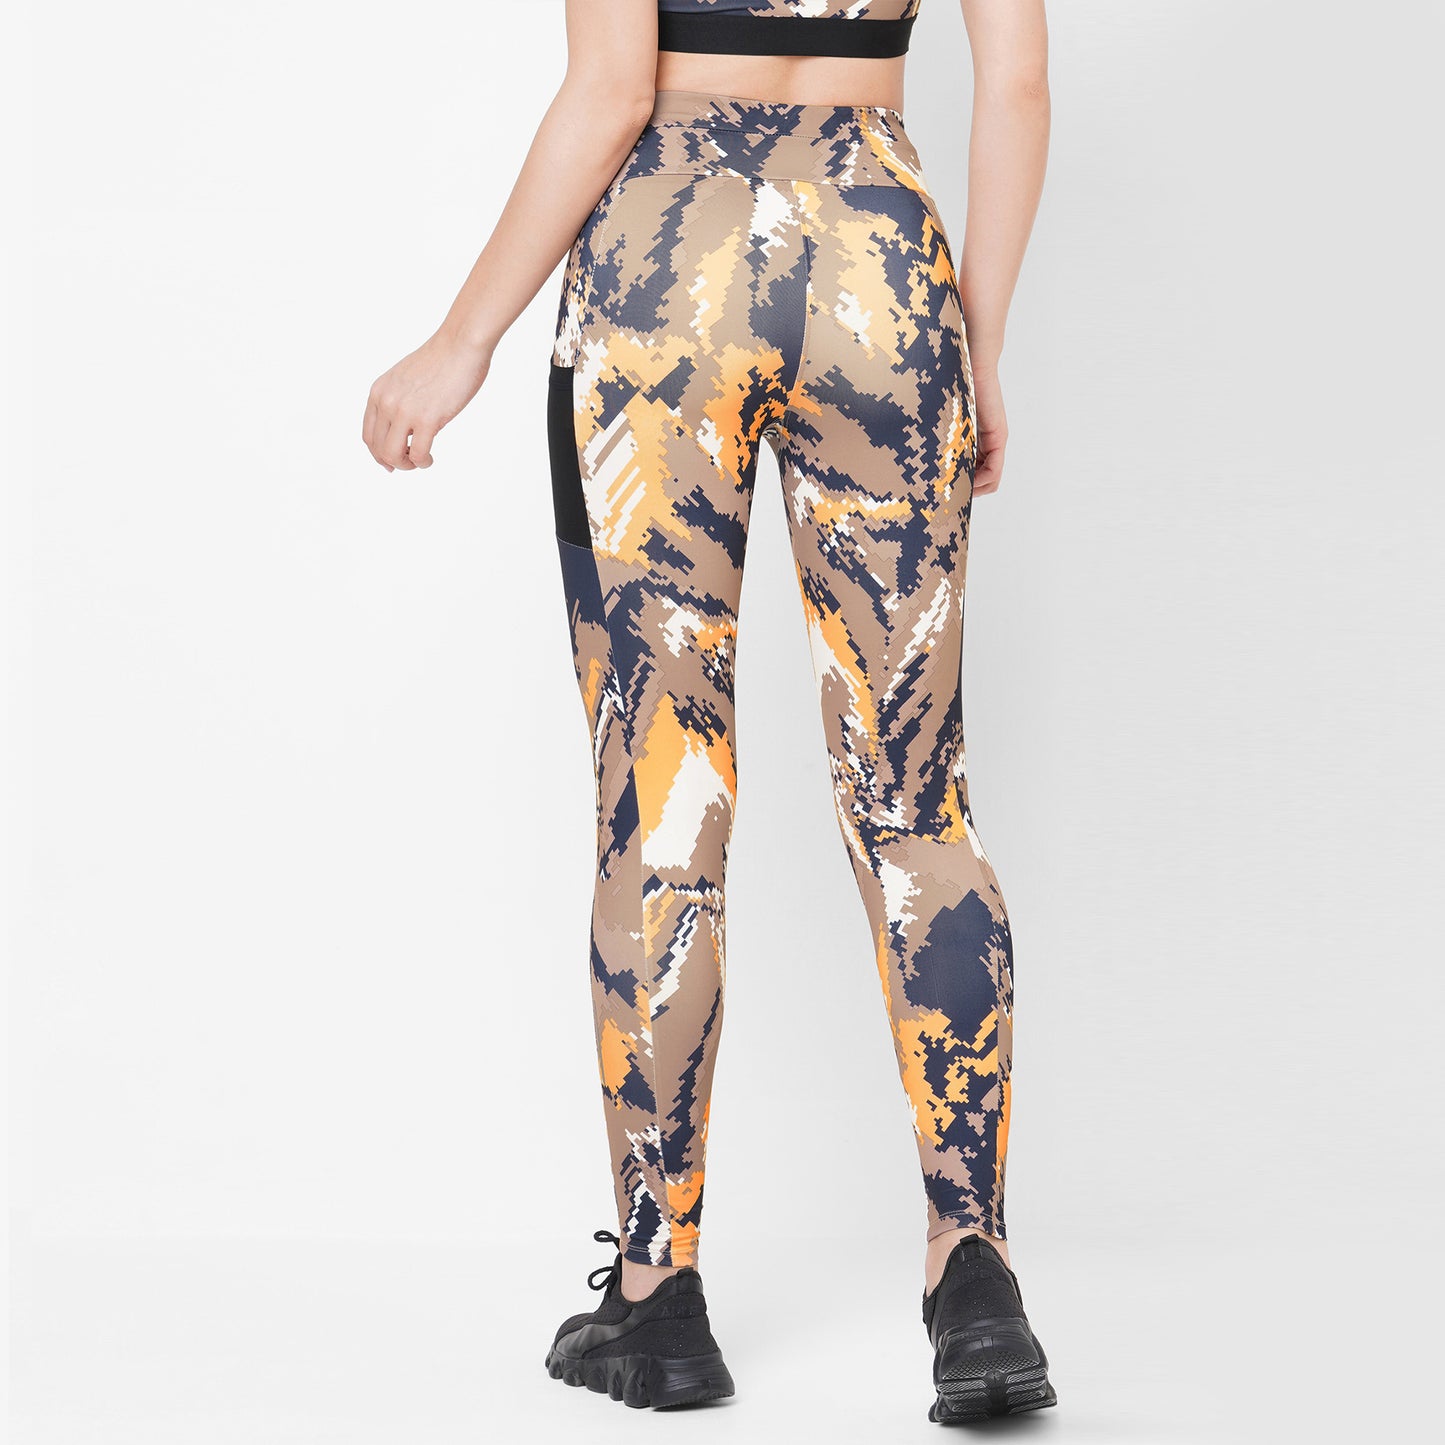 JUST-DRY 7/8 High Waist Camo Printed Workout Tights for Women